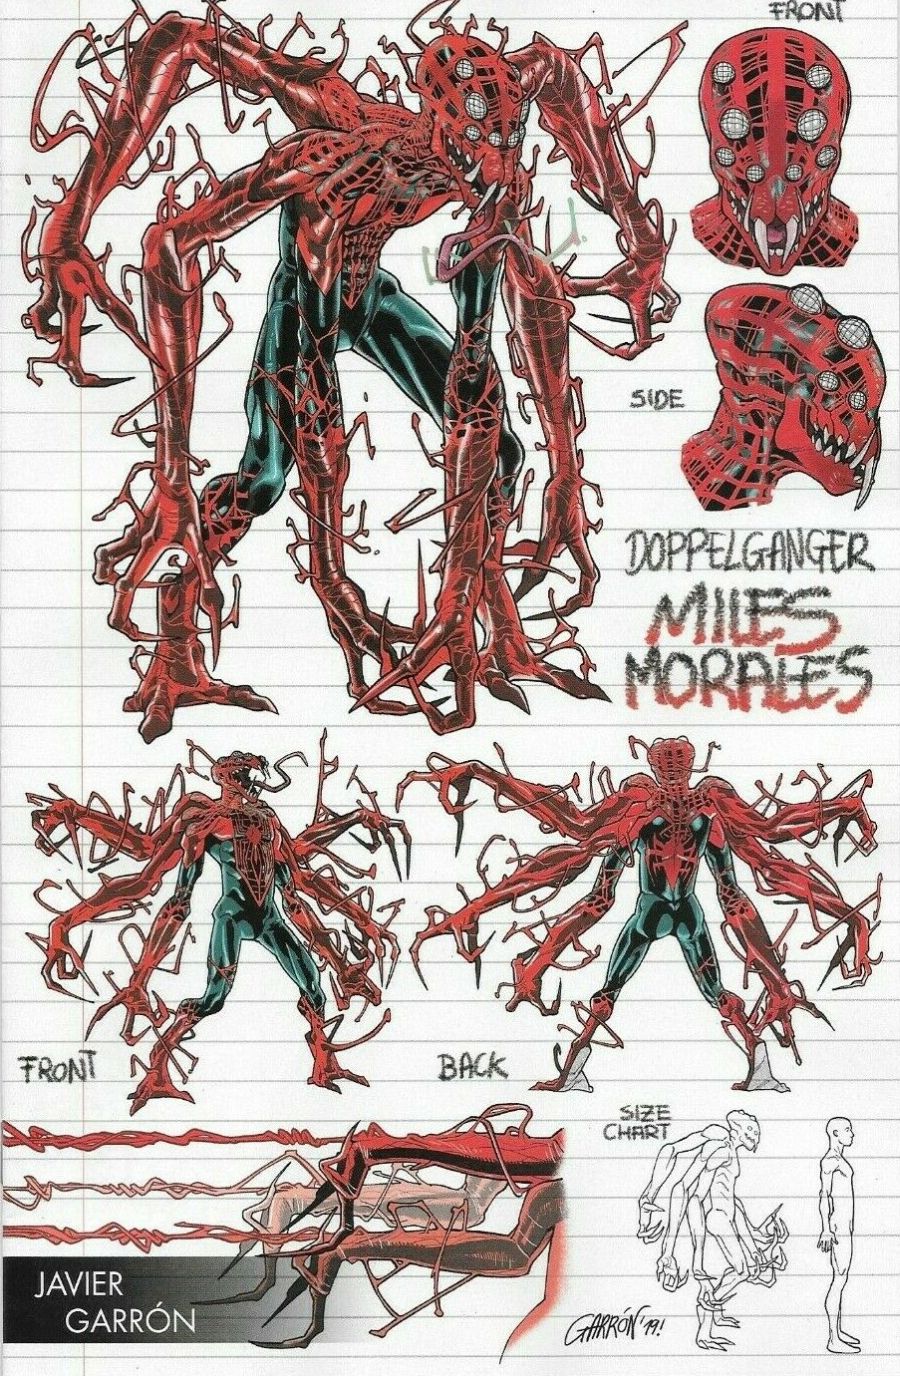 Absolute Carnage: Miles Morales #1